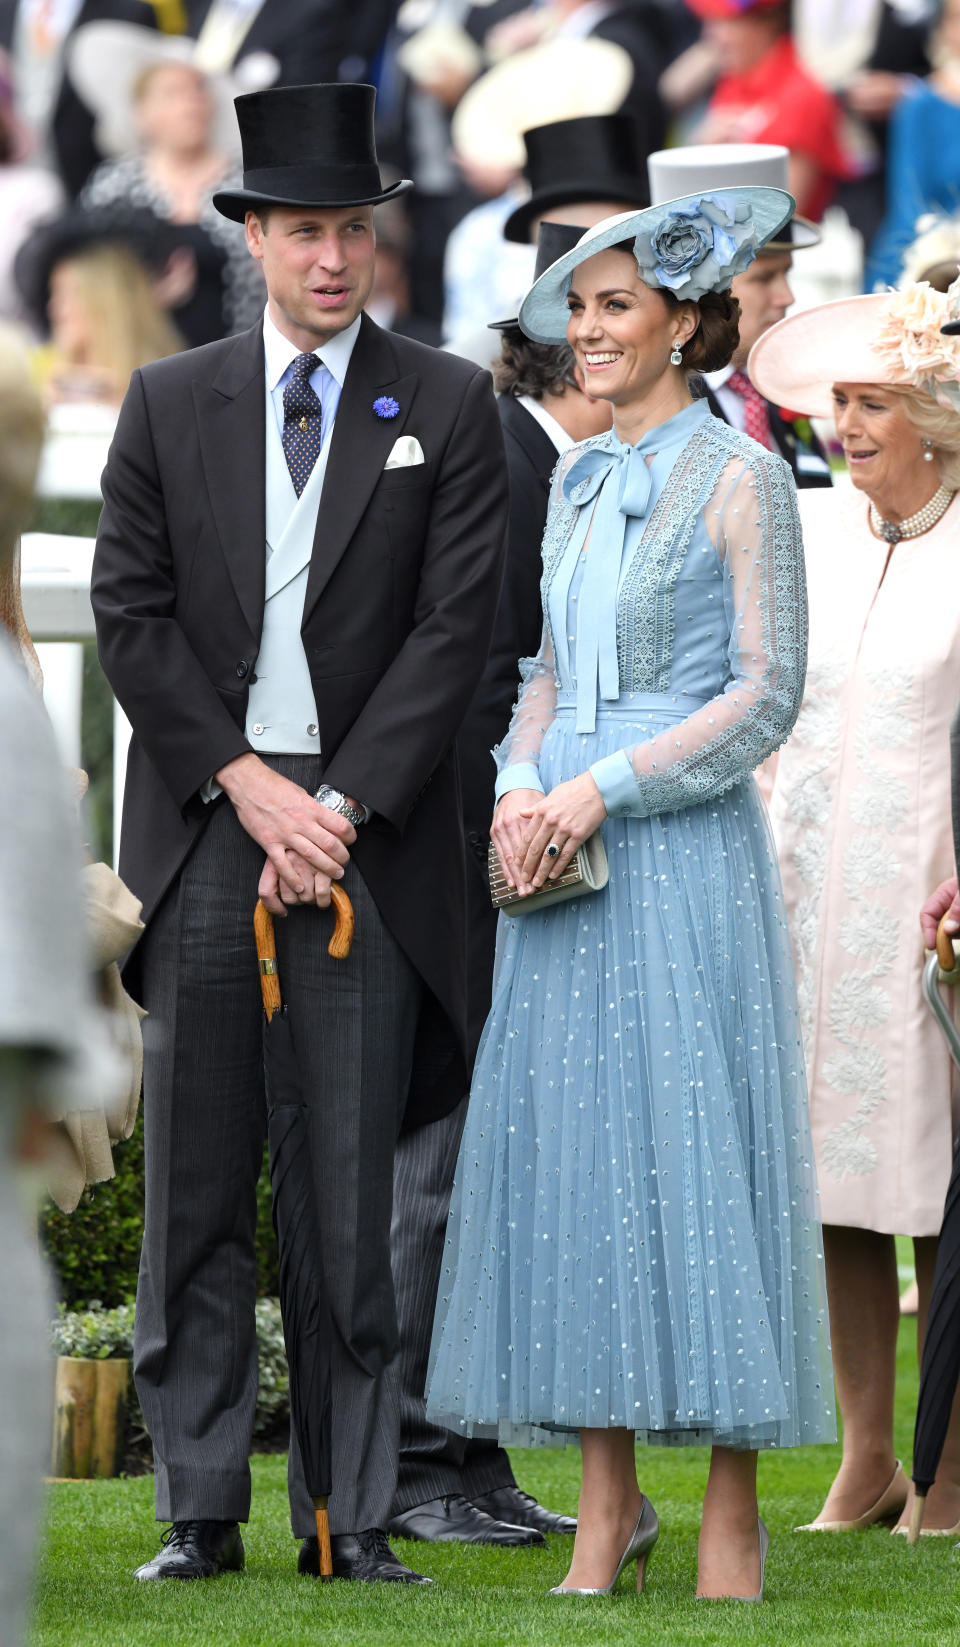 June 2019: The Duke and Duchess of Cambridge attend Royal Ascot 2019